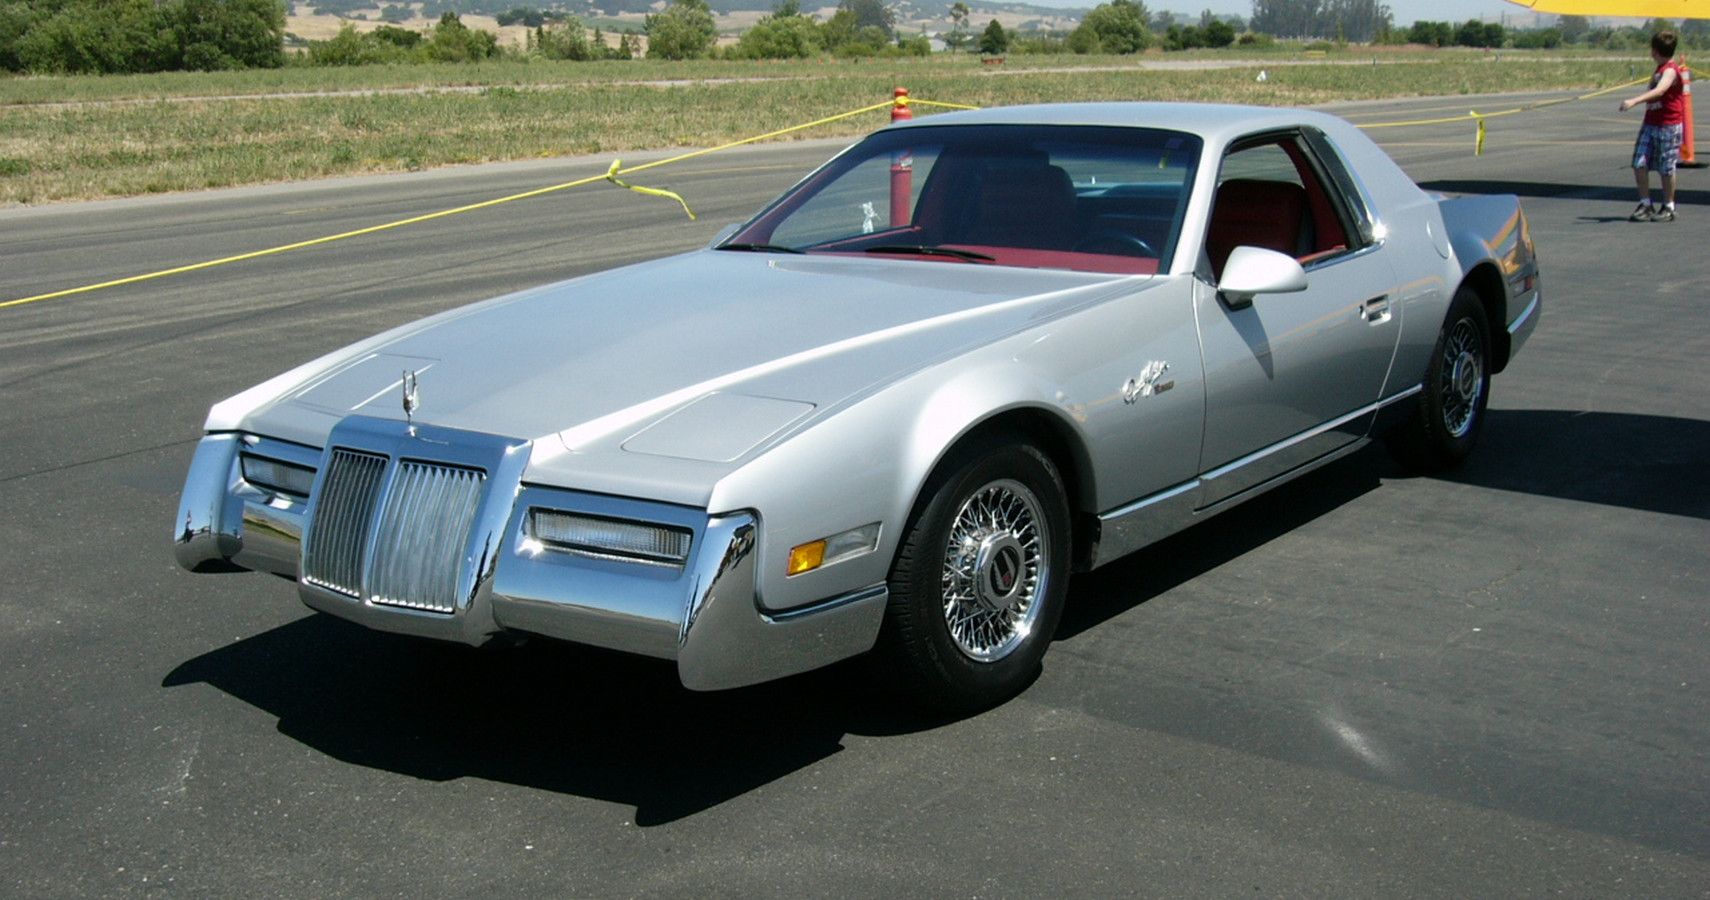 These Are The 10 Worst Cars Of The '80s You Can Own | HotCars